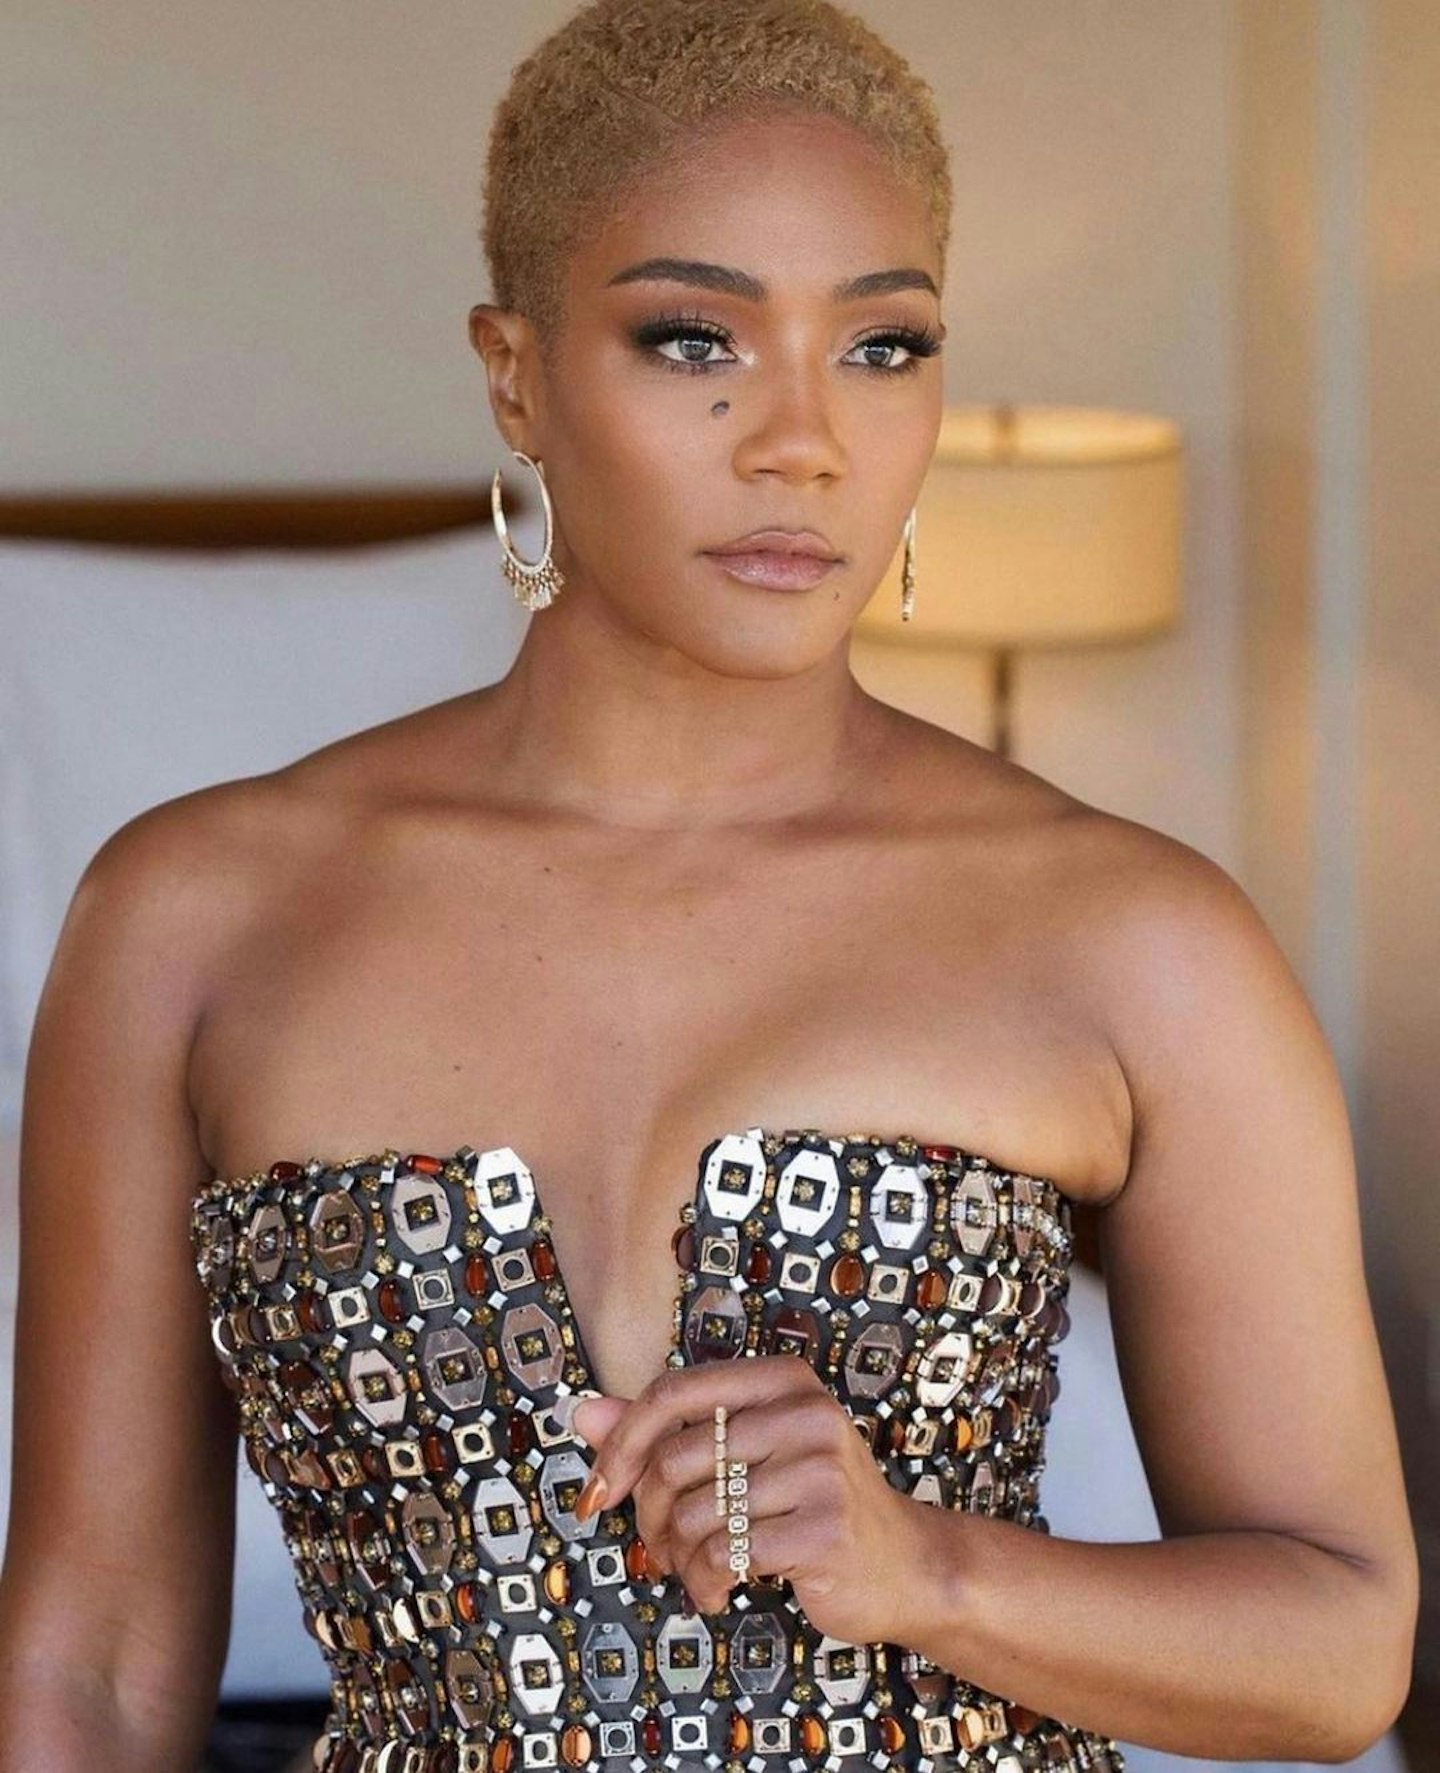 The Golden Blonde - Hairstyles for Short, Textured Afro Hair